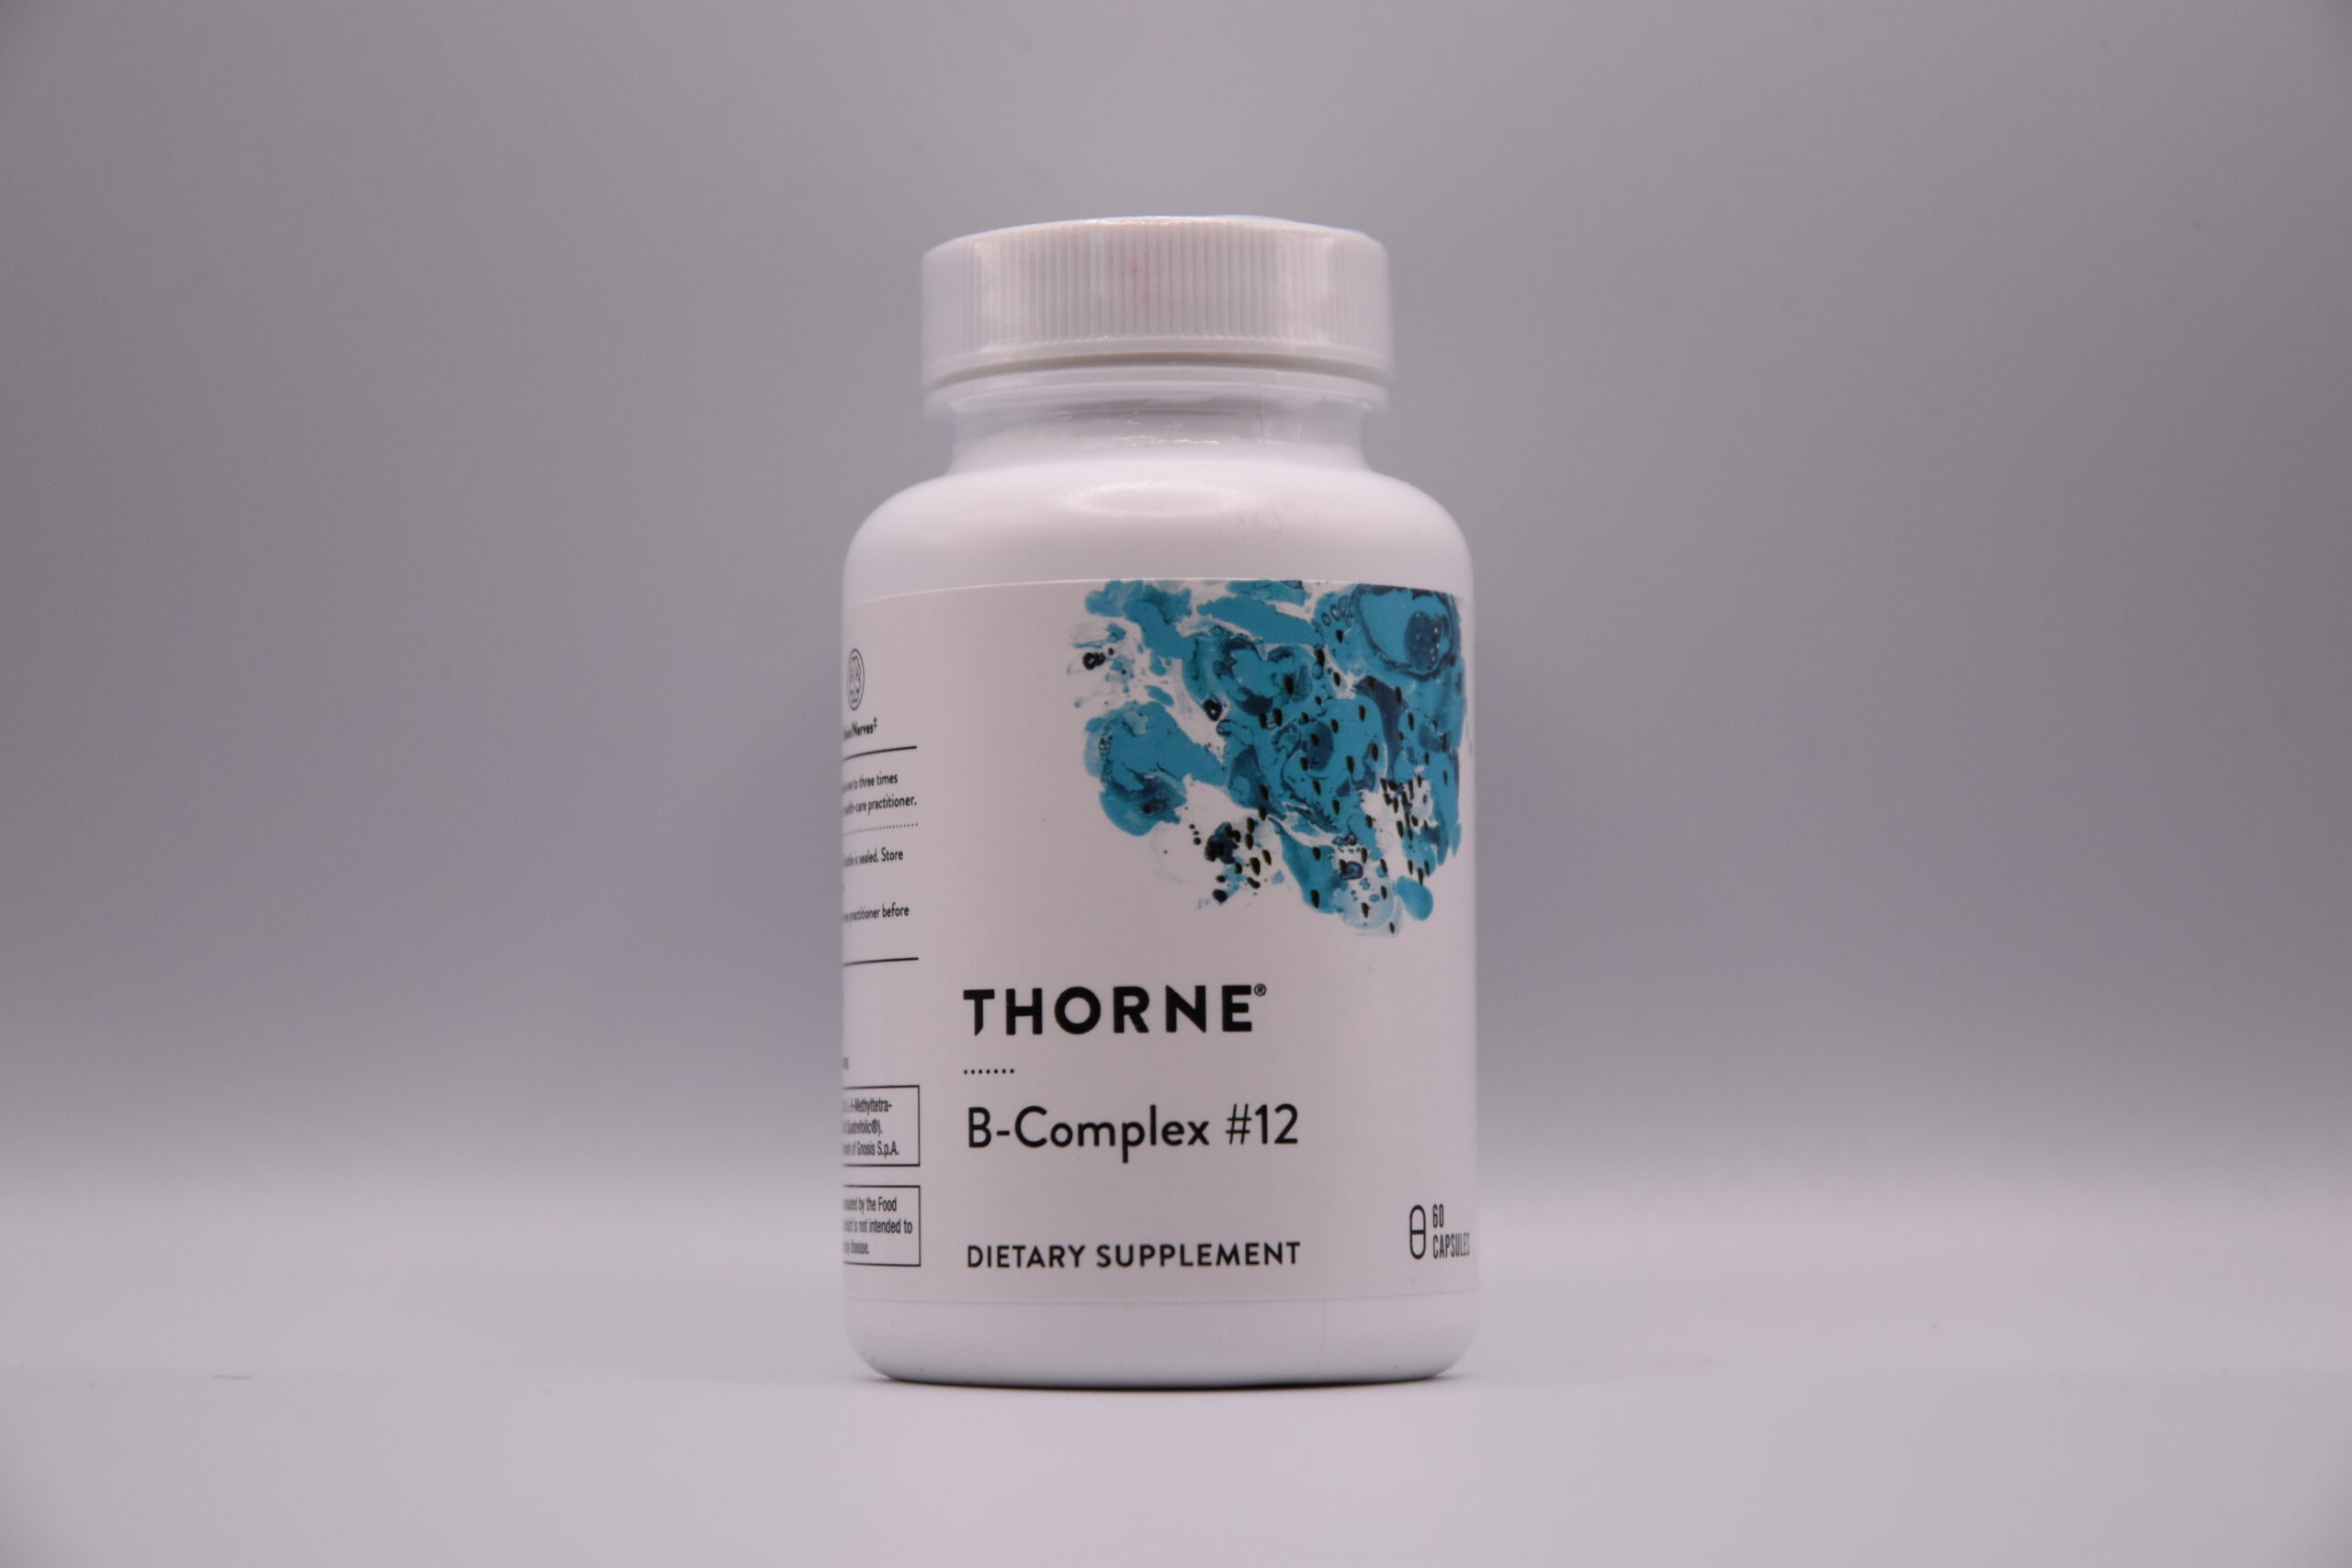 A bottle of Thorne - B-Complex #12 dietary supplement on a plain background.